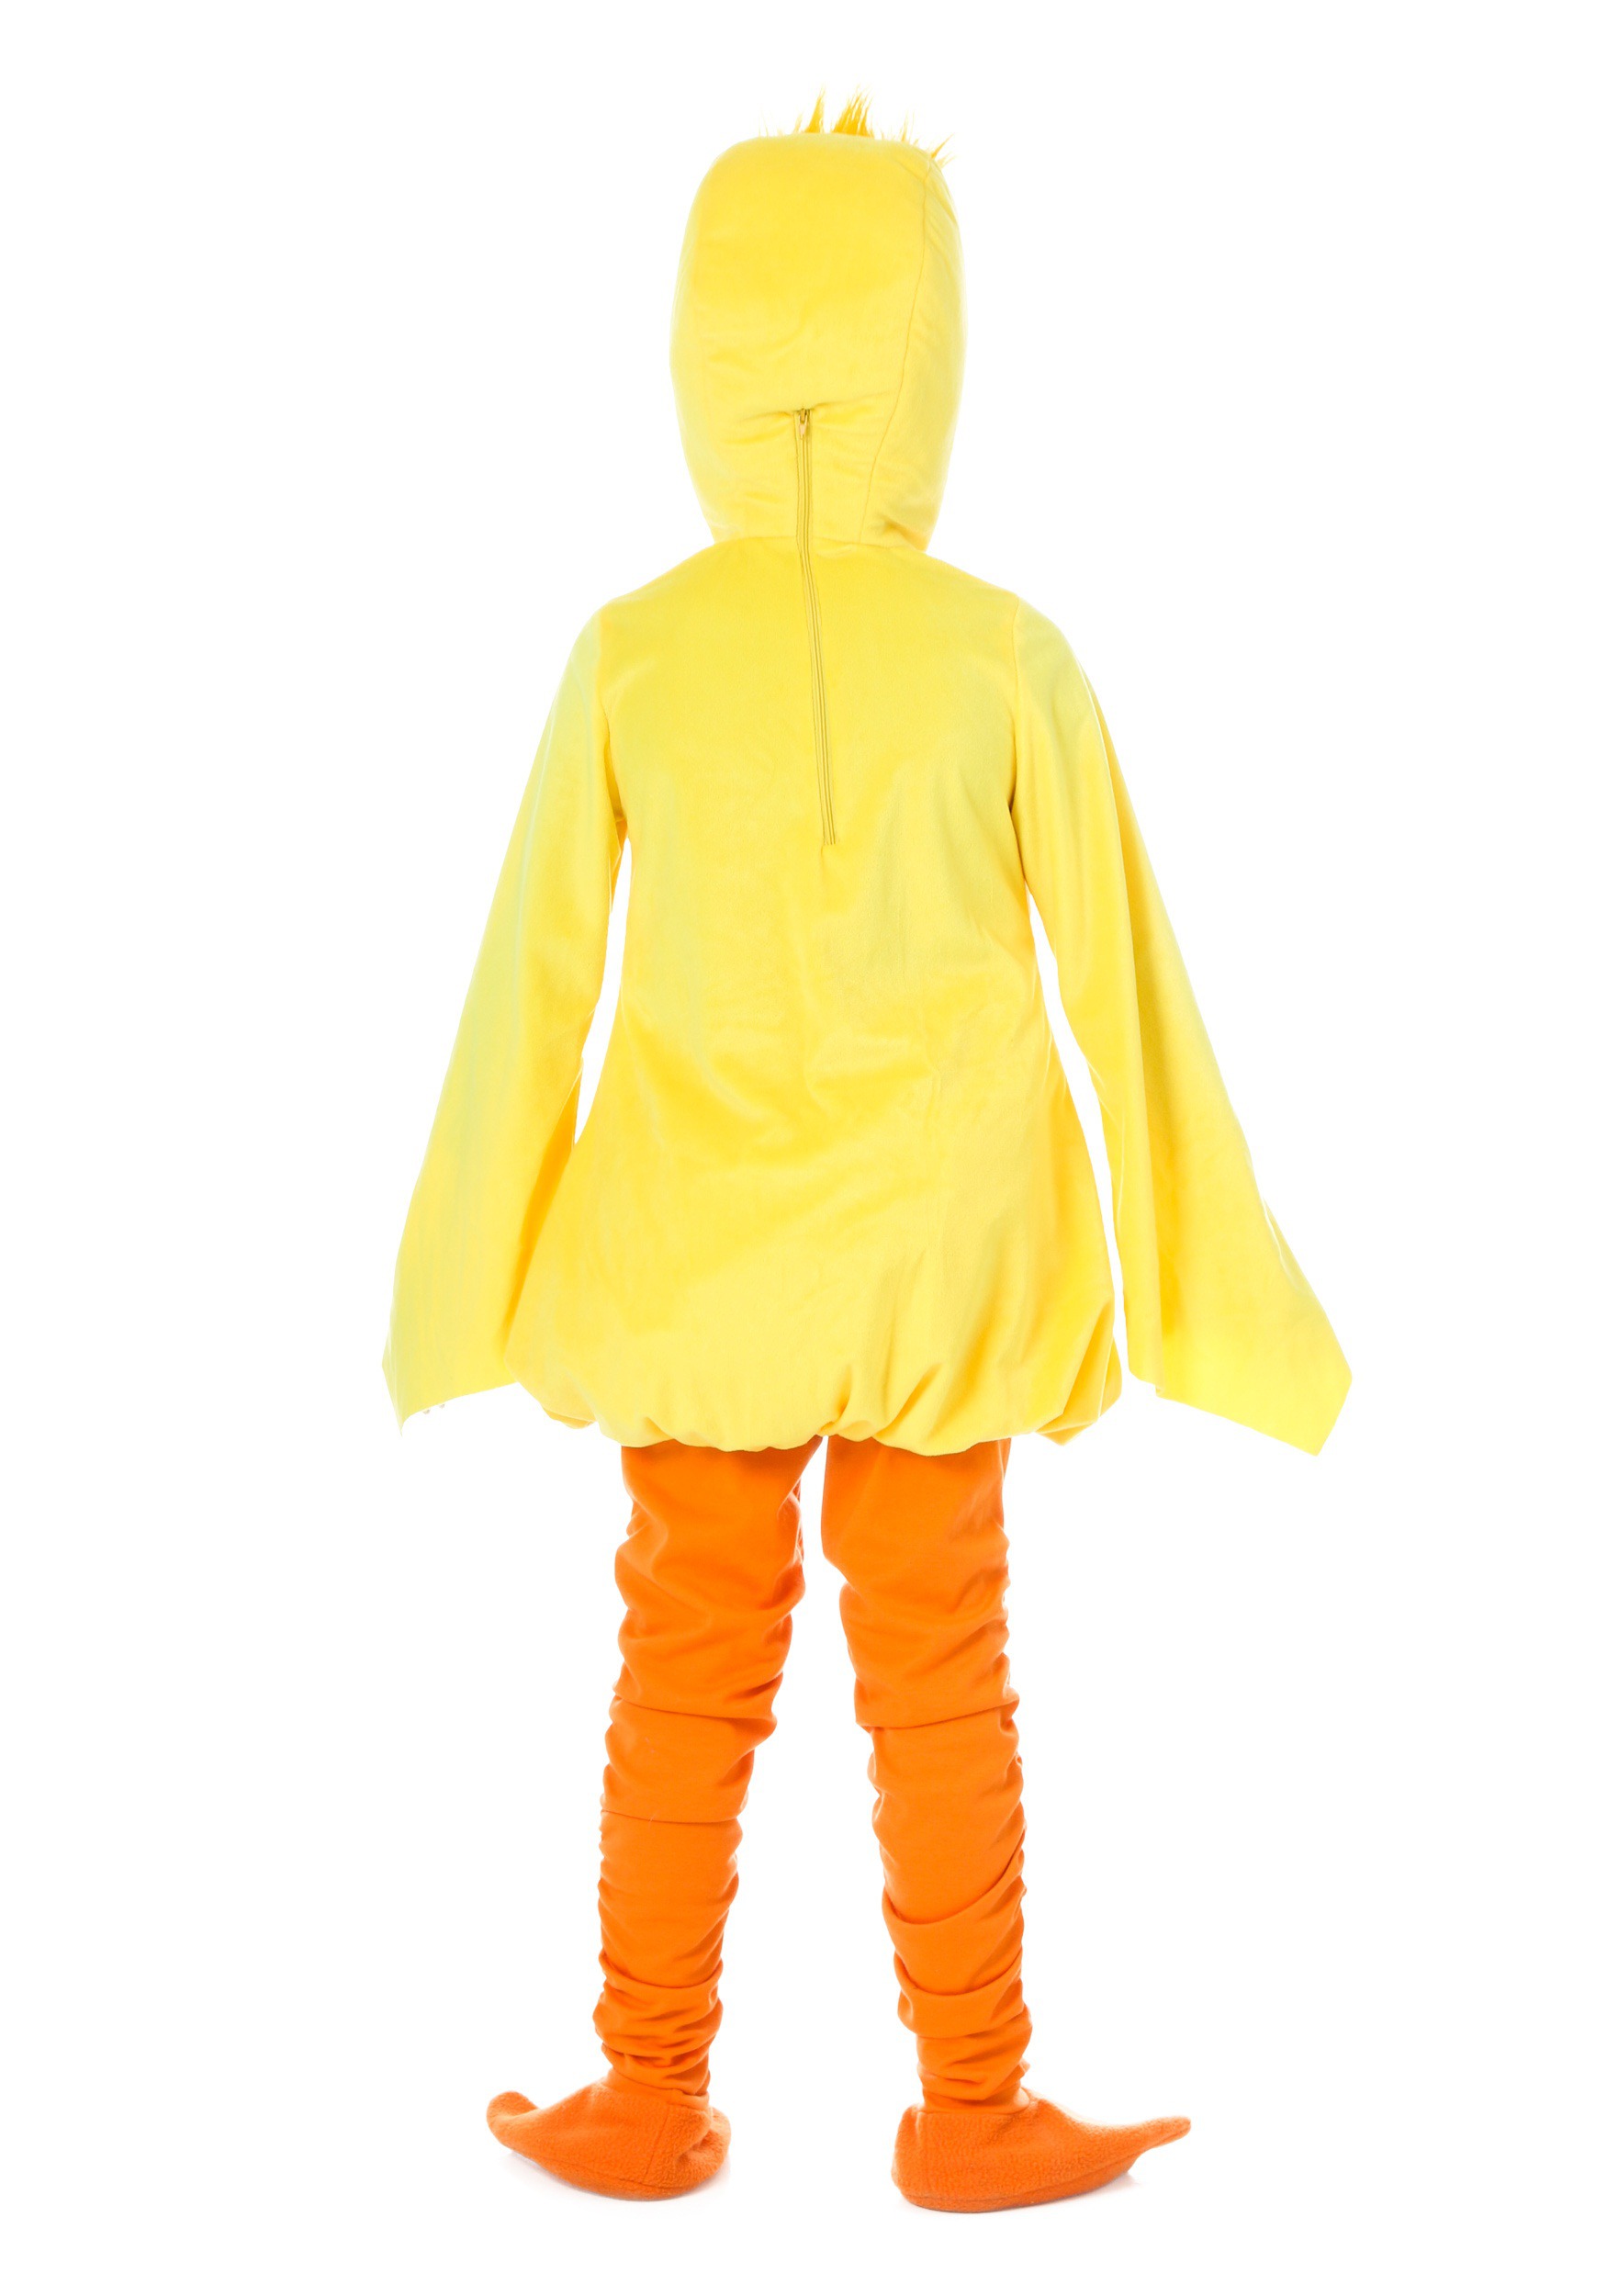 Duck Costume For Adults 85